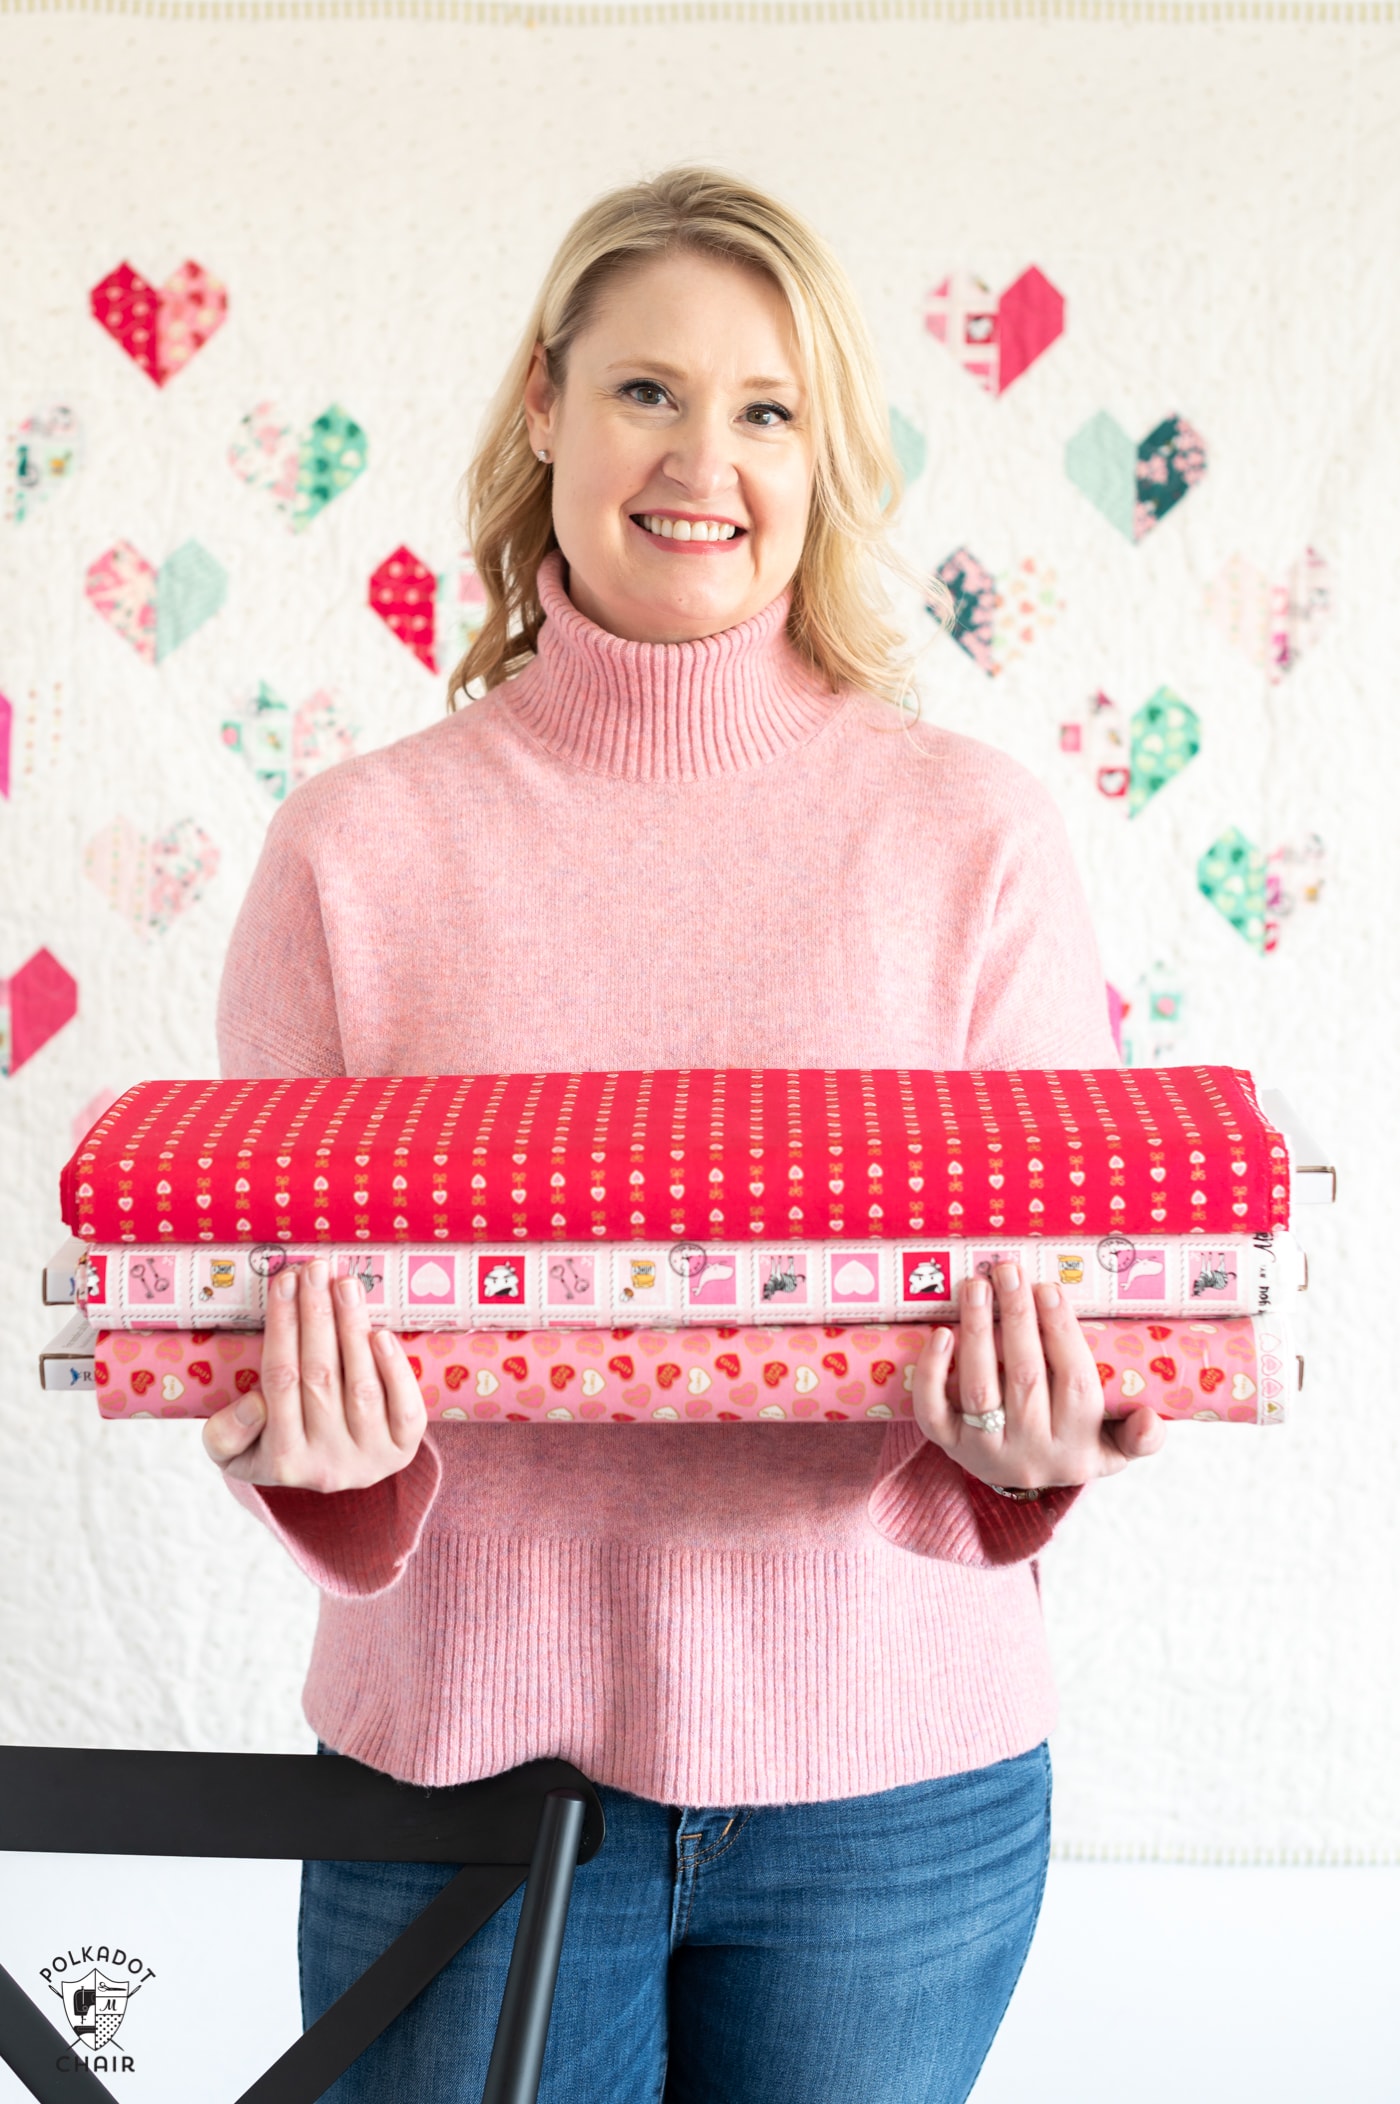 woman in pink sweater holding fabric